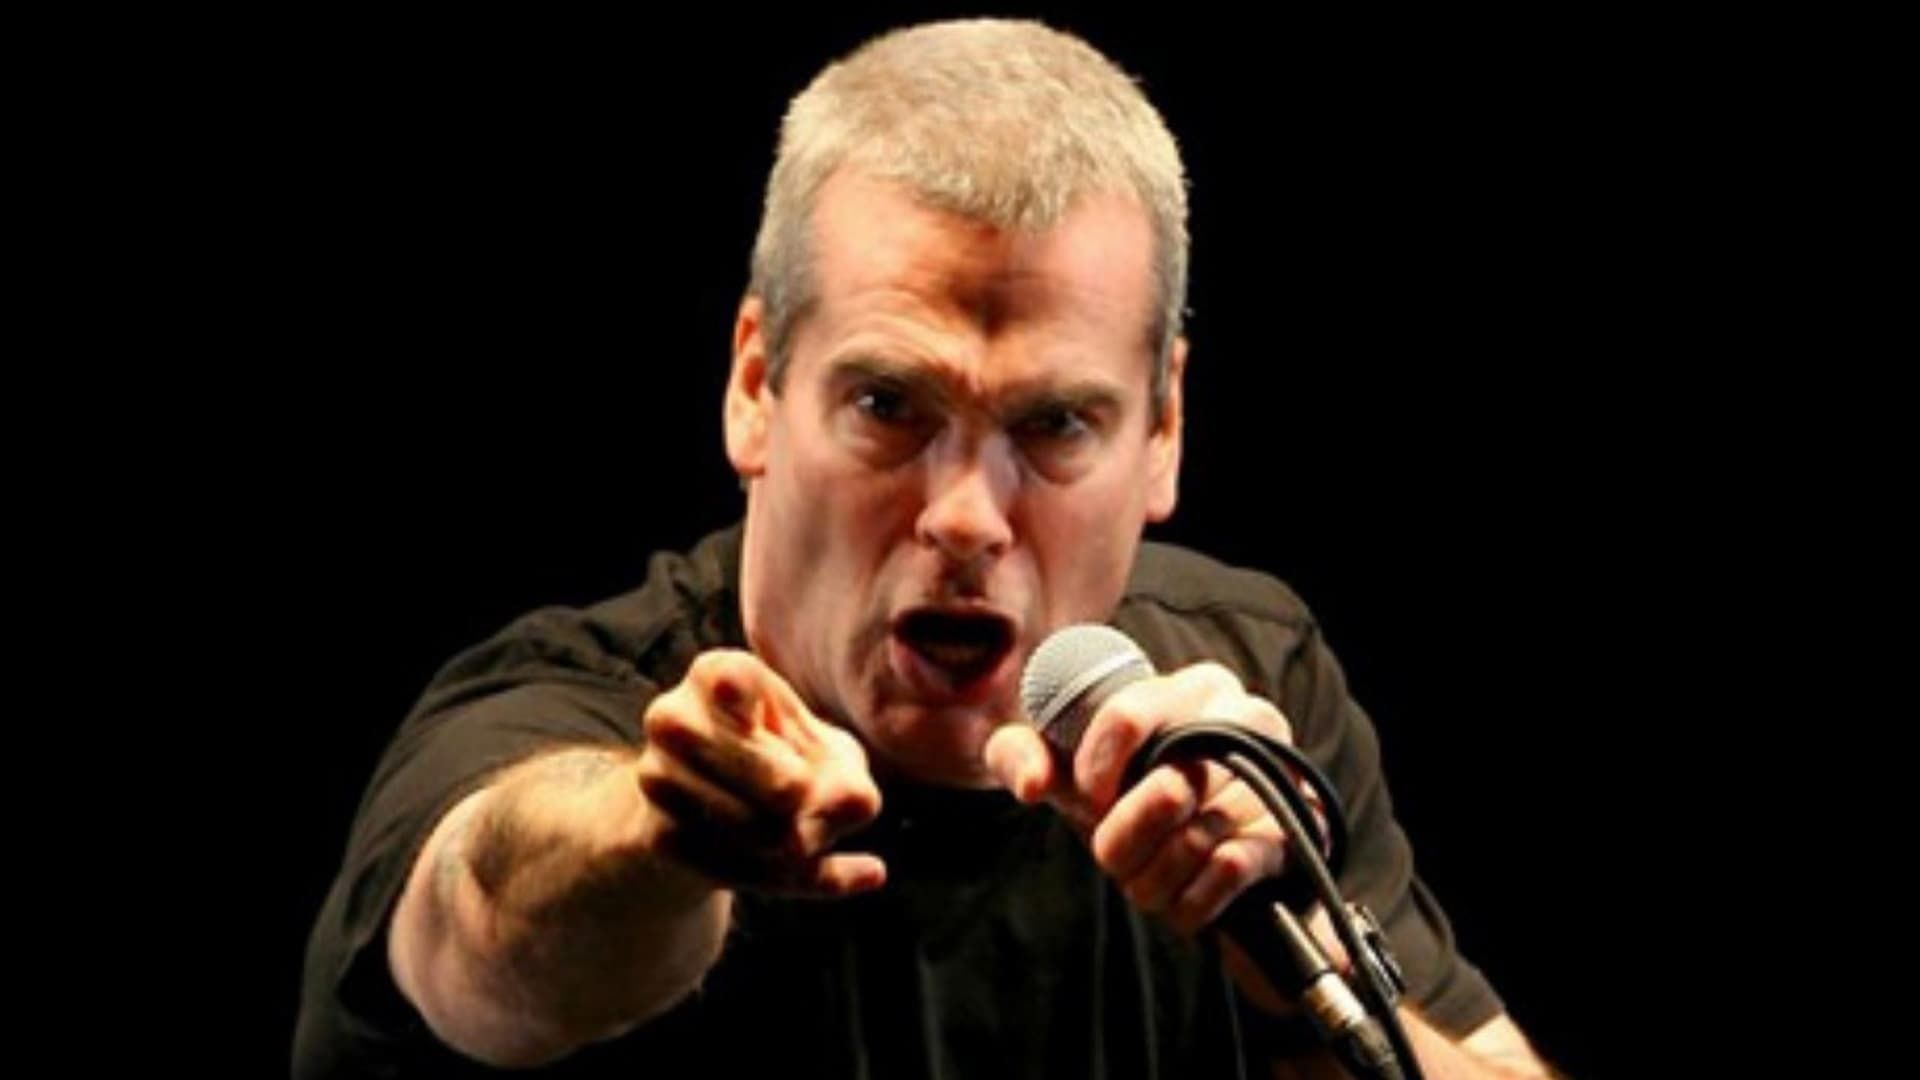 Henry Rollins: Uncut from NYC background